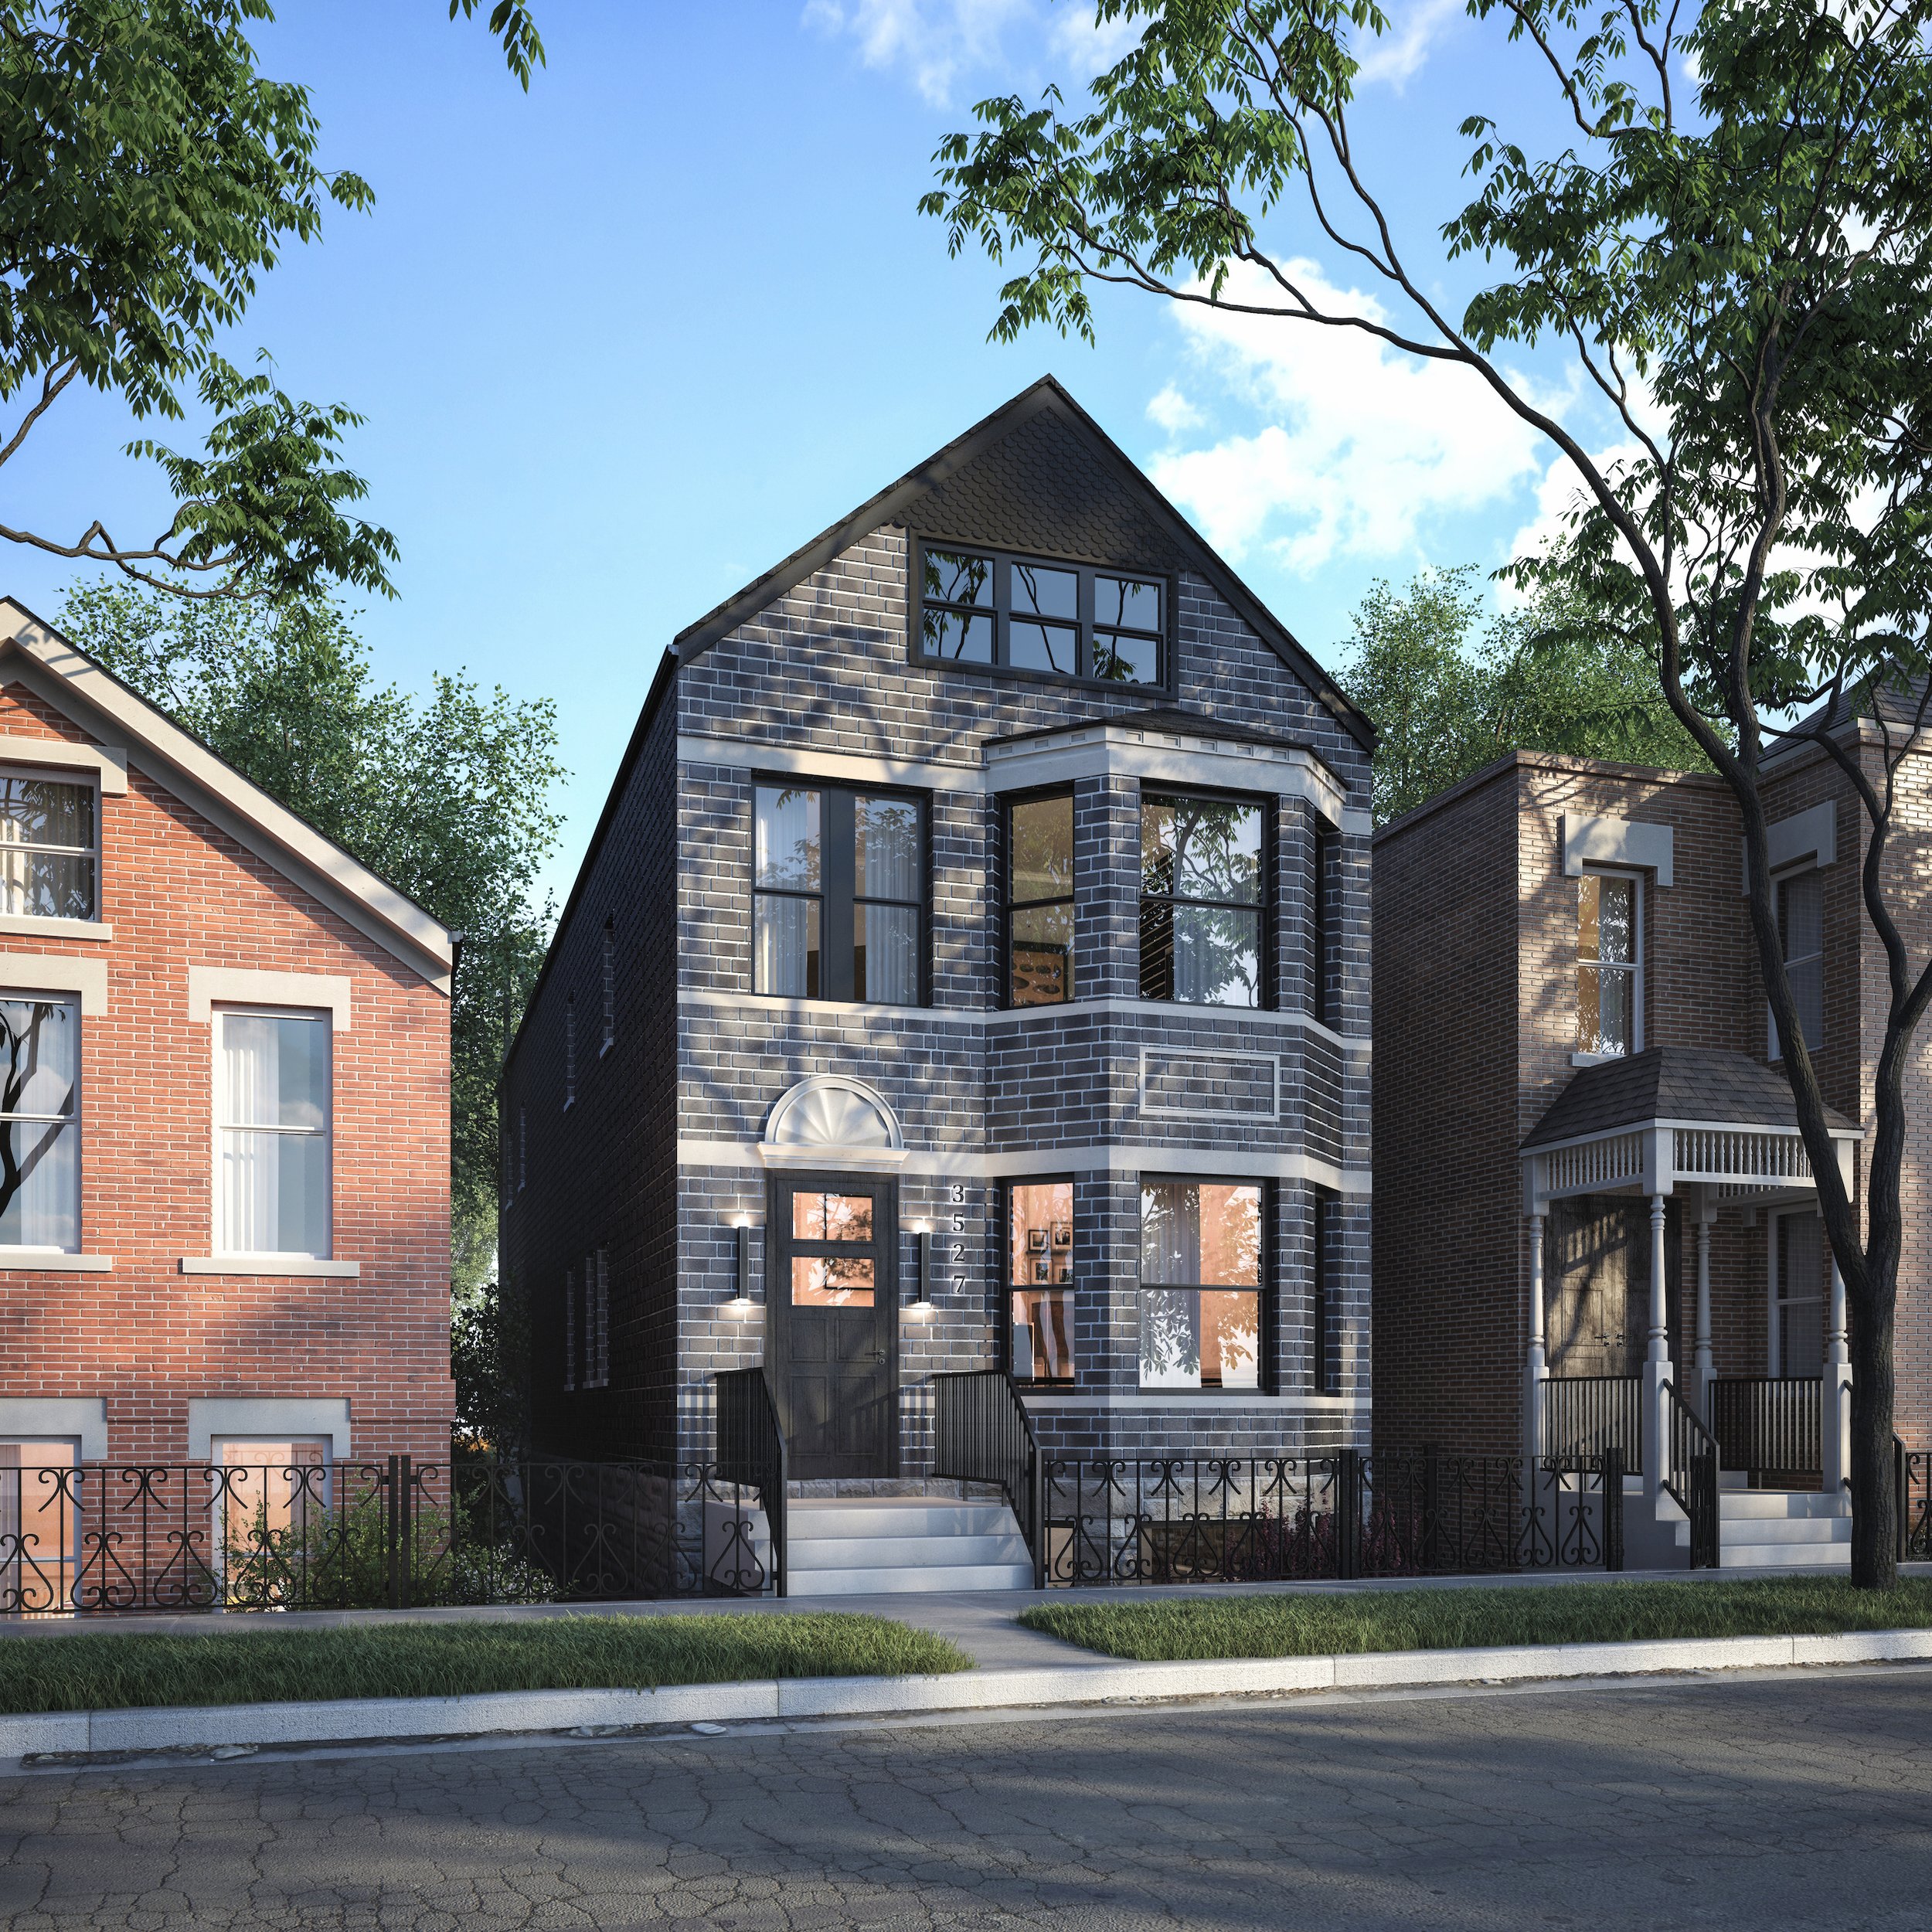 Single Family Home with Dark Gray Brick and Black Window Trim and Door